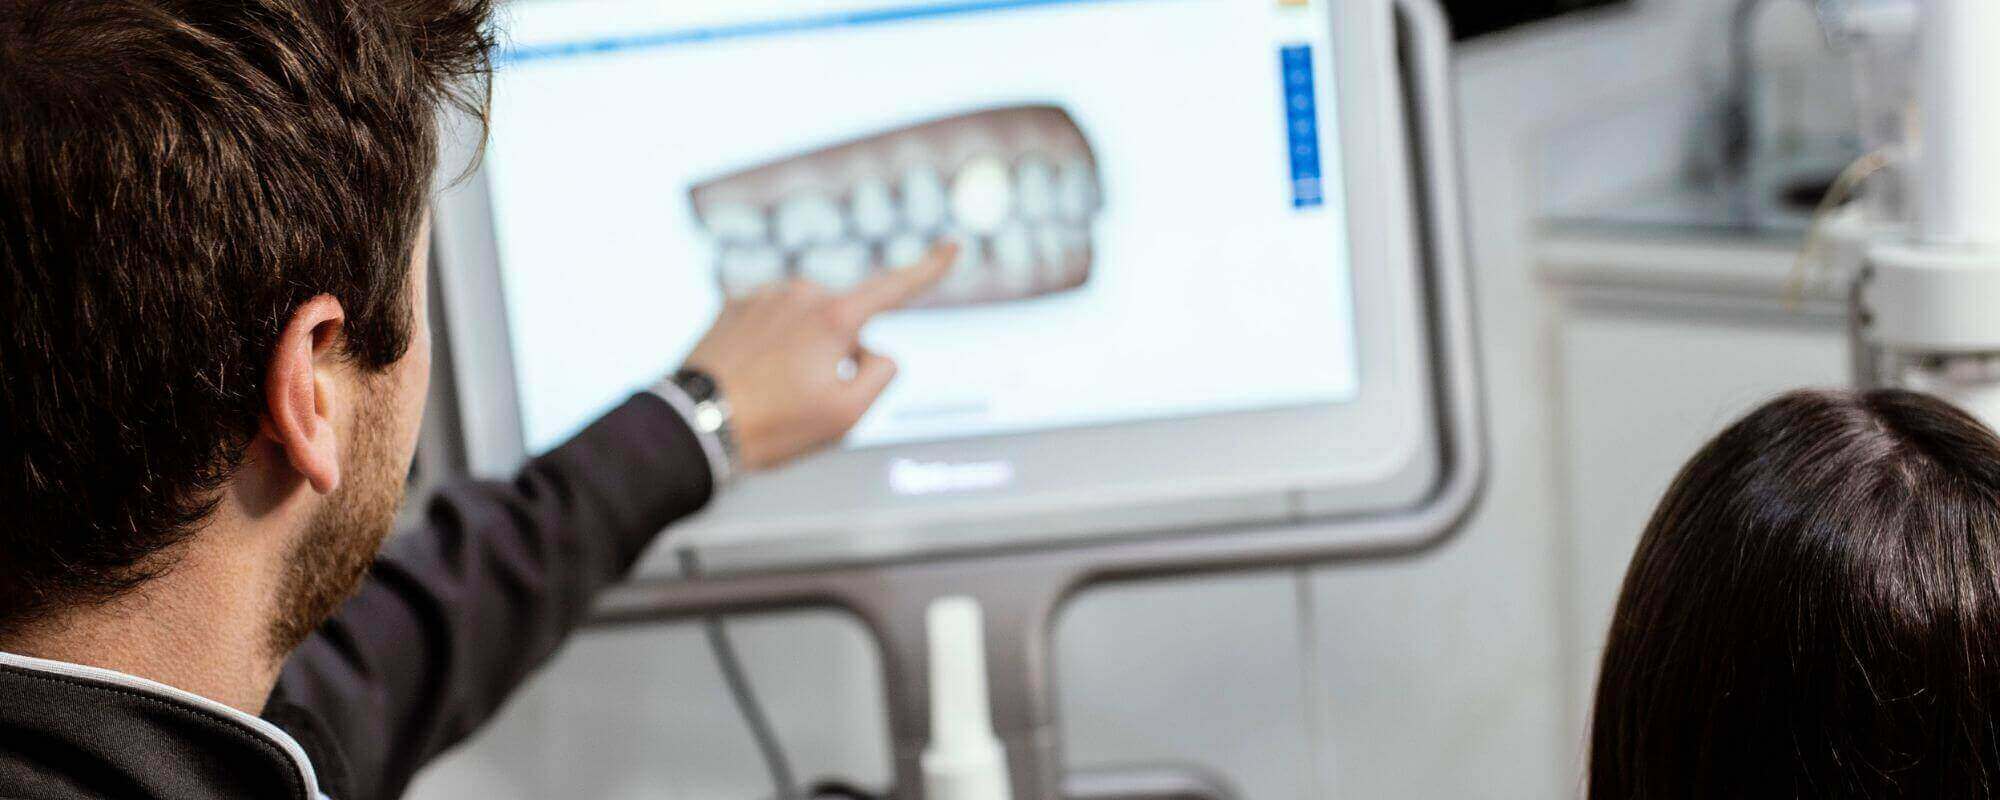 Invisalign consultation pointing at a screen of a model of teeth in Stafford